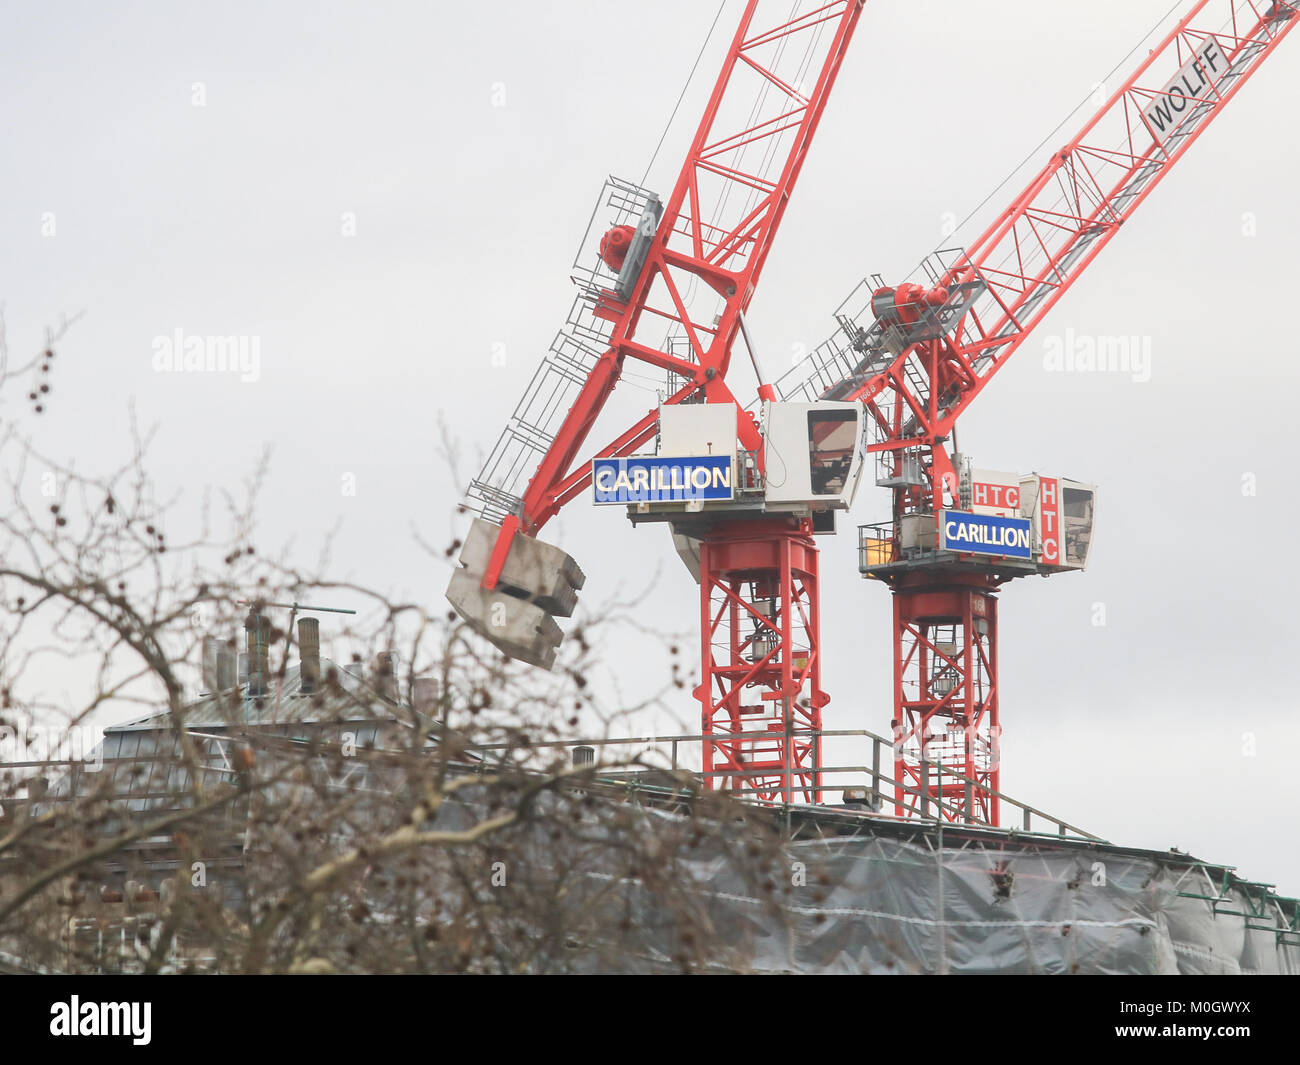 London, UK. 22nd Jan, 2018. The second largest construction company Carillon based in Wolverhampton which employed 43,000 people including 20,000 in the UK has collpased and went into liquidation on Monday 15th January 2018 and the company is mired in £1.3bn debt with a vast pensions deficit. The government and British Transport secretary Chris Grayling have been criticised for awarding contracts to HS2 rail link and ordered an investigation into Carillion directors. Credit: amer ghazzal/Alamy Live News Stock Photo